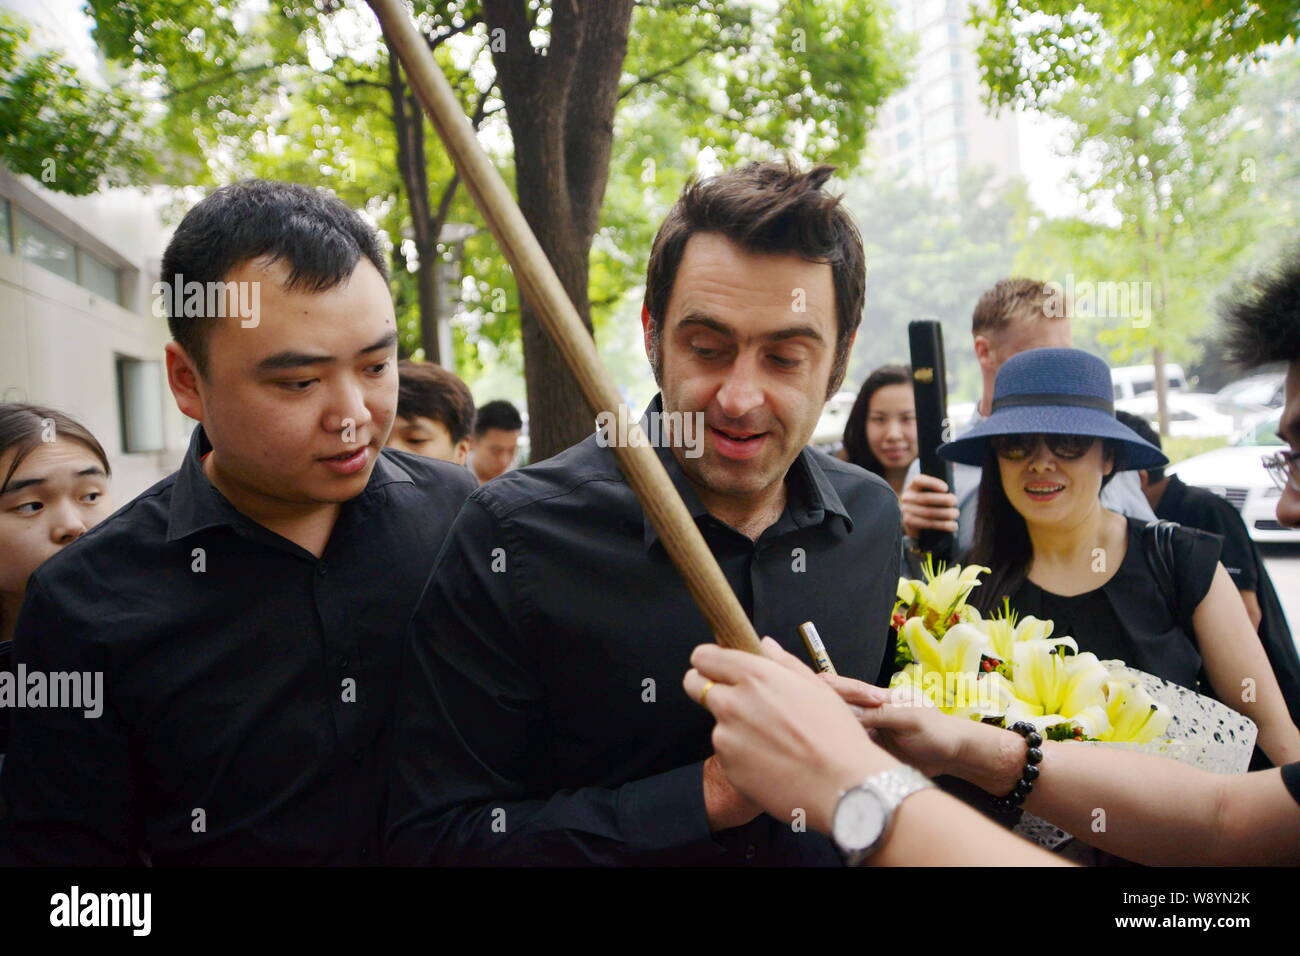 English snooker player Ronnie OSullivan, center, autographs for a fan as he arrives for a preparation for the upcoming World Snooker Shanghai Masters Stock Photo